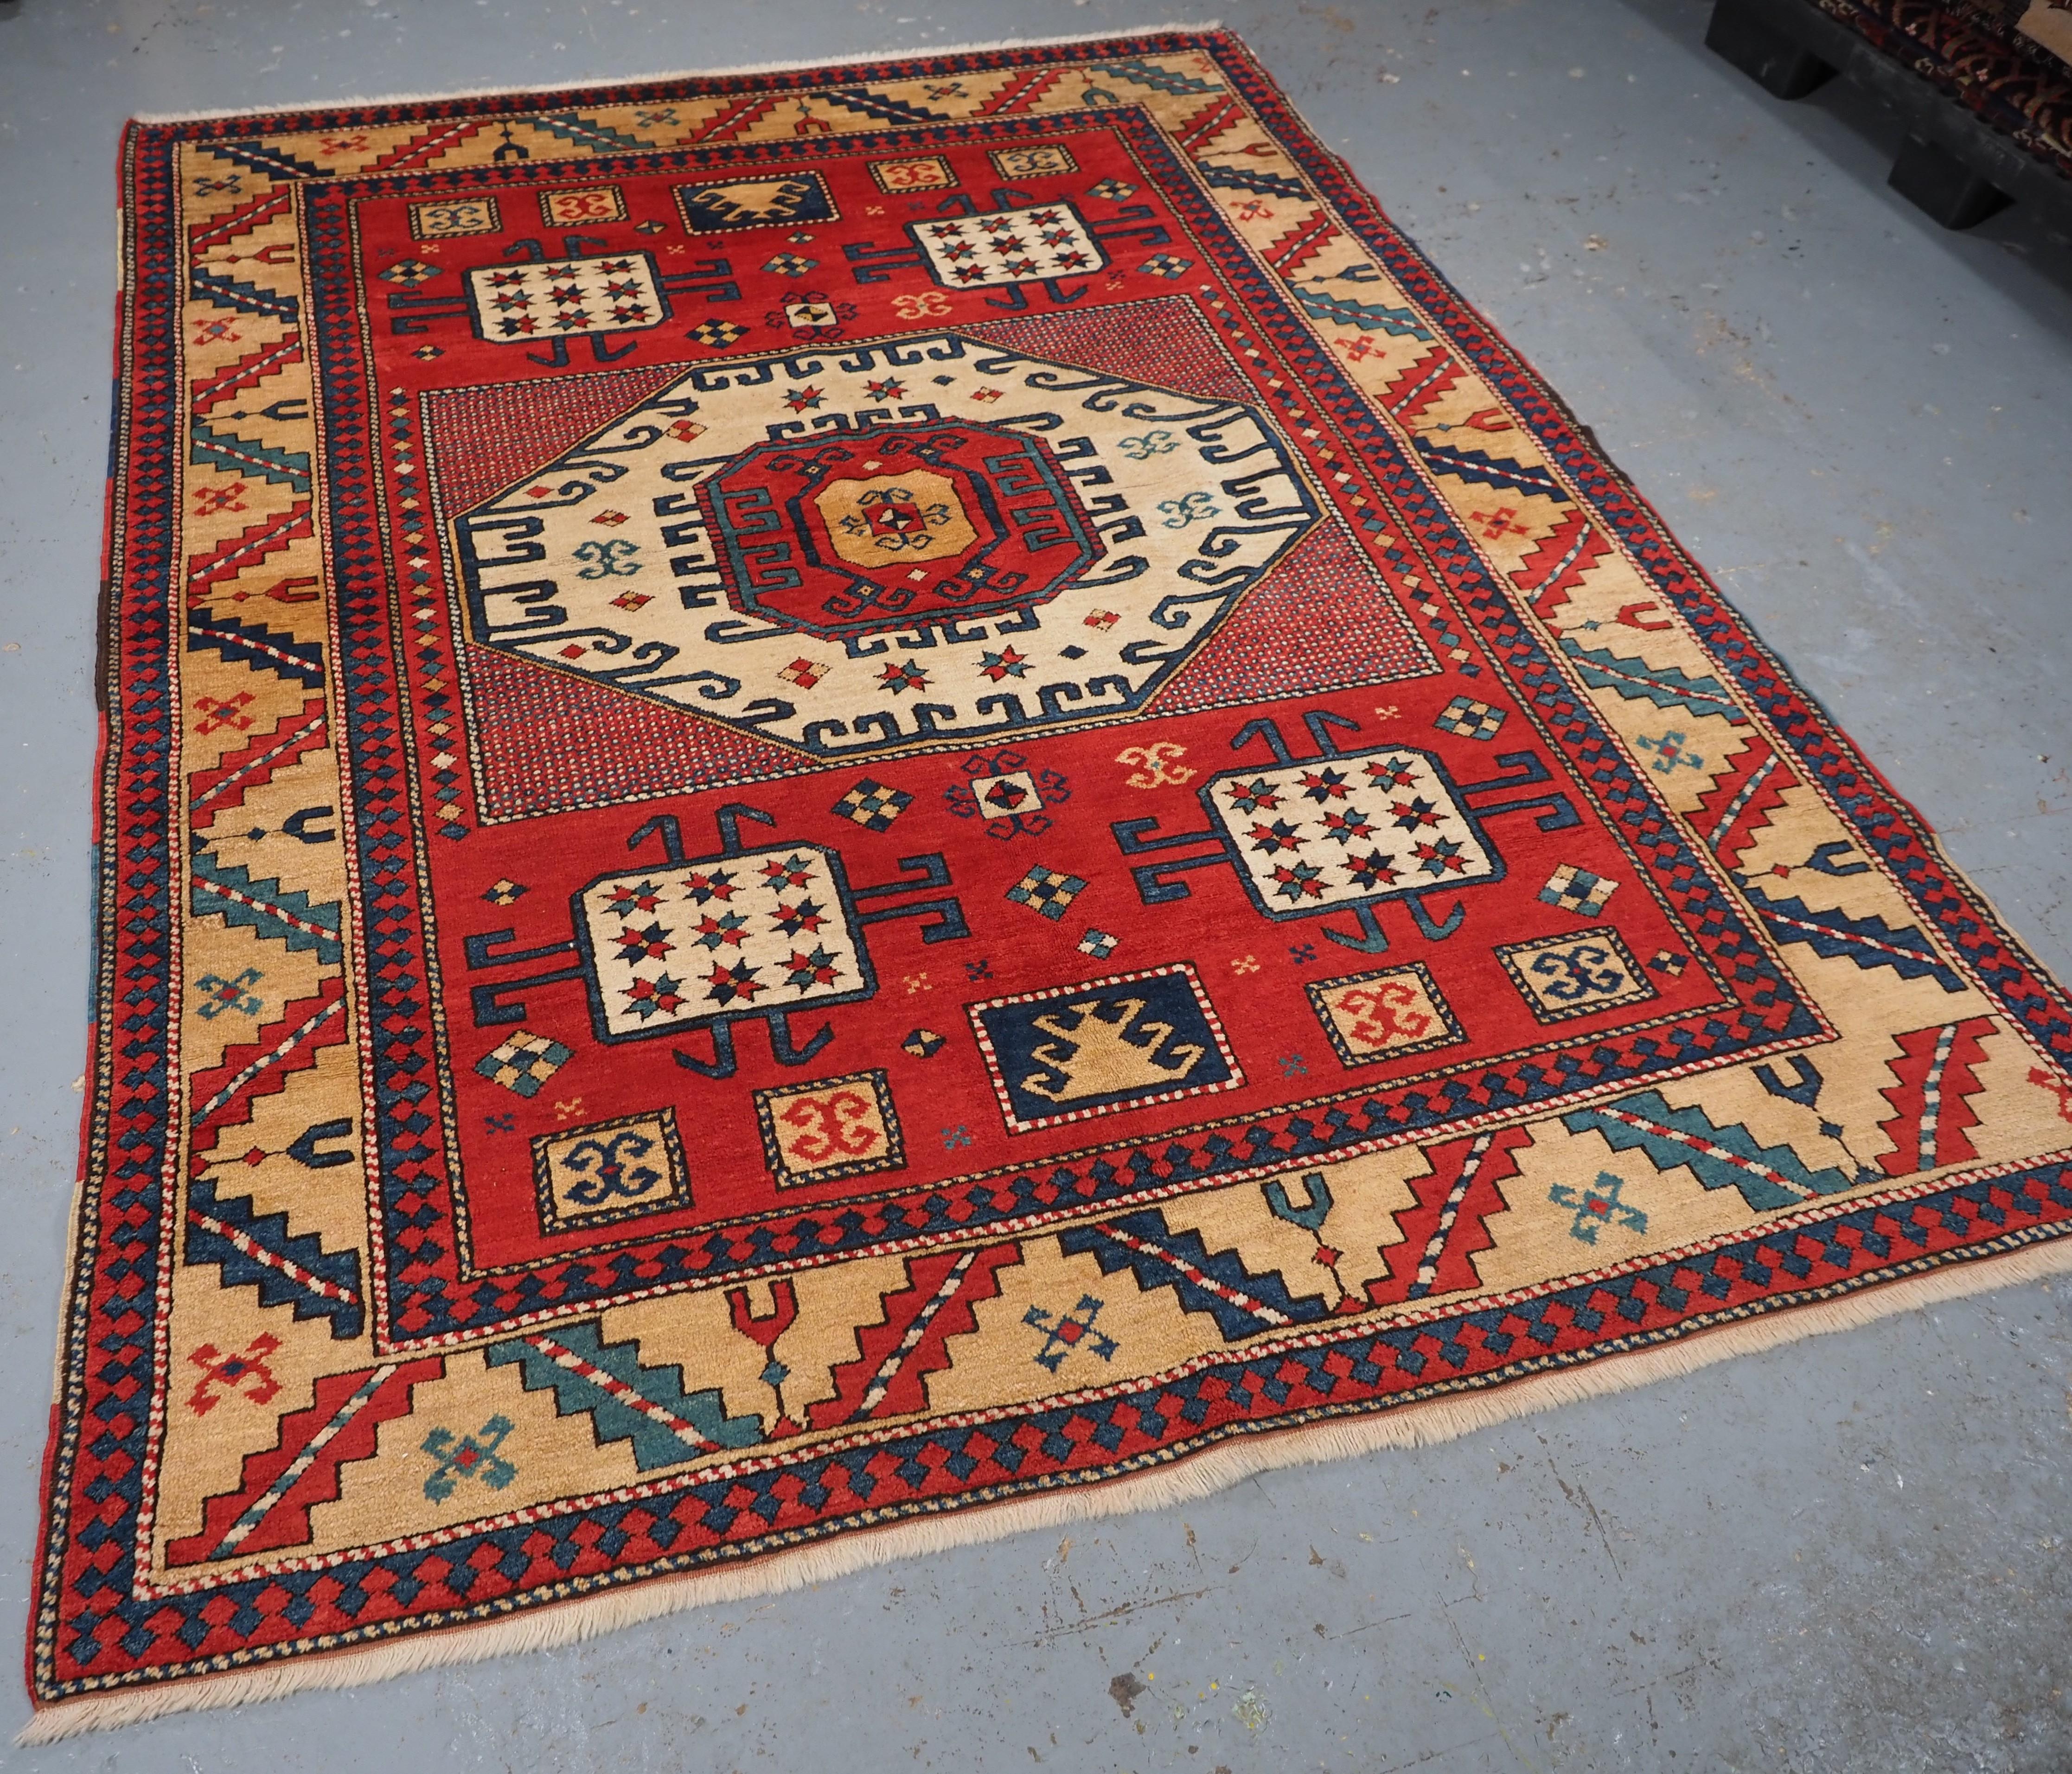 Size: 7ft 5in x 5ft 9in (227 x 175cm).

Caucasian Karachov Kazak style rug of classic design on a red ground.

Circa 1980.

An outstanding example of a Karachov Kazak design rug with the traditional large octagonal central medallion design. The